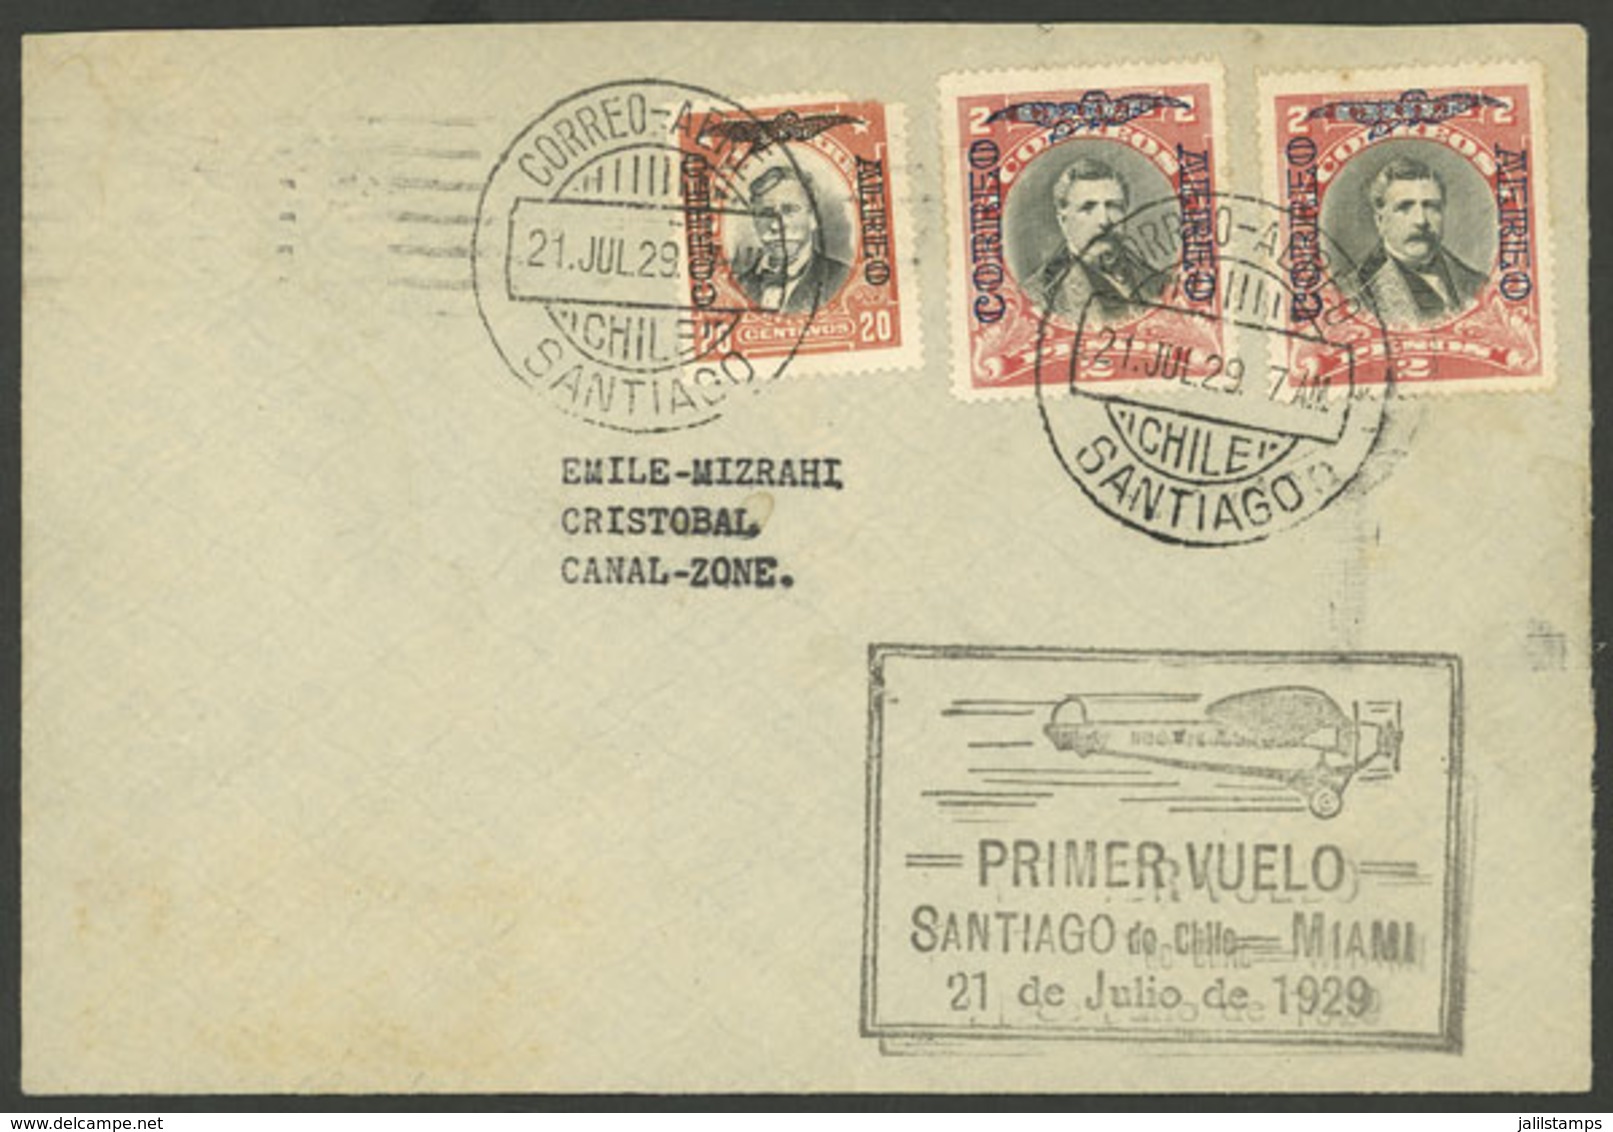 CHILE: 21/JUL/1929 Santiago - Cristobal (Canal Zone), Panagra First Flight, With Special Mark And Arrival Backstamp Of 2 - Cile